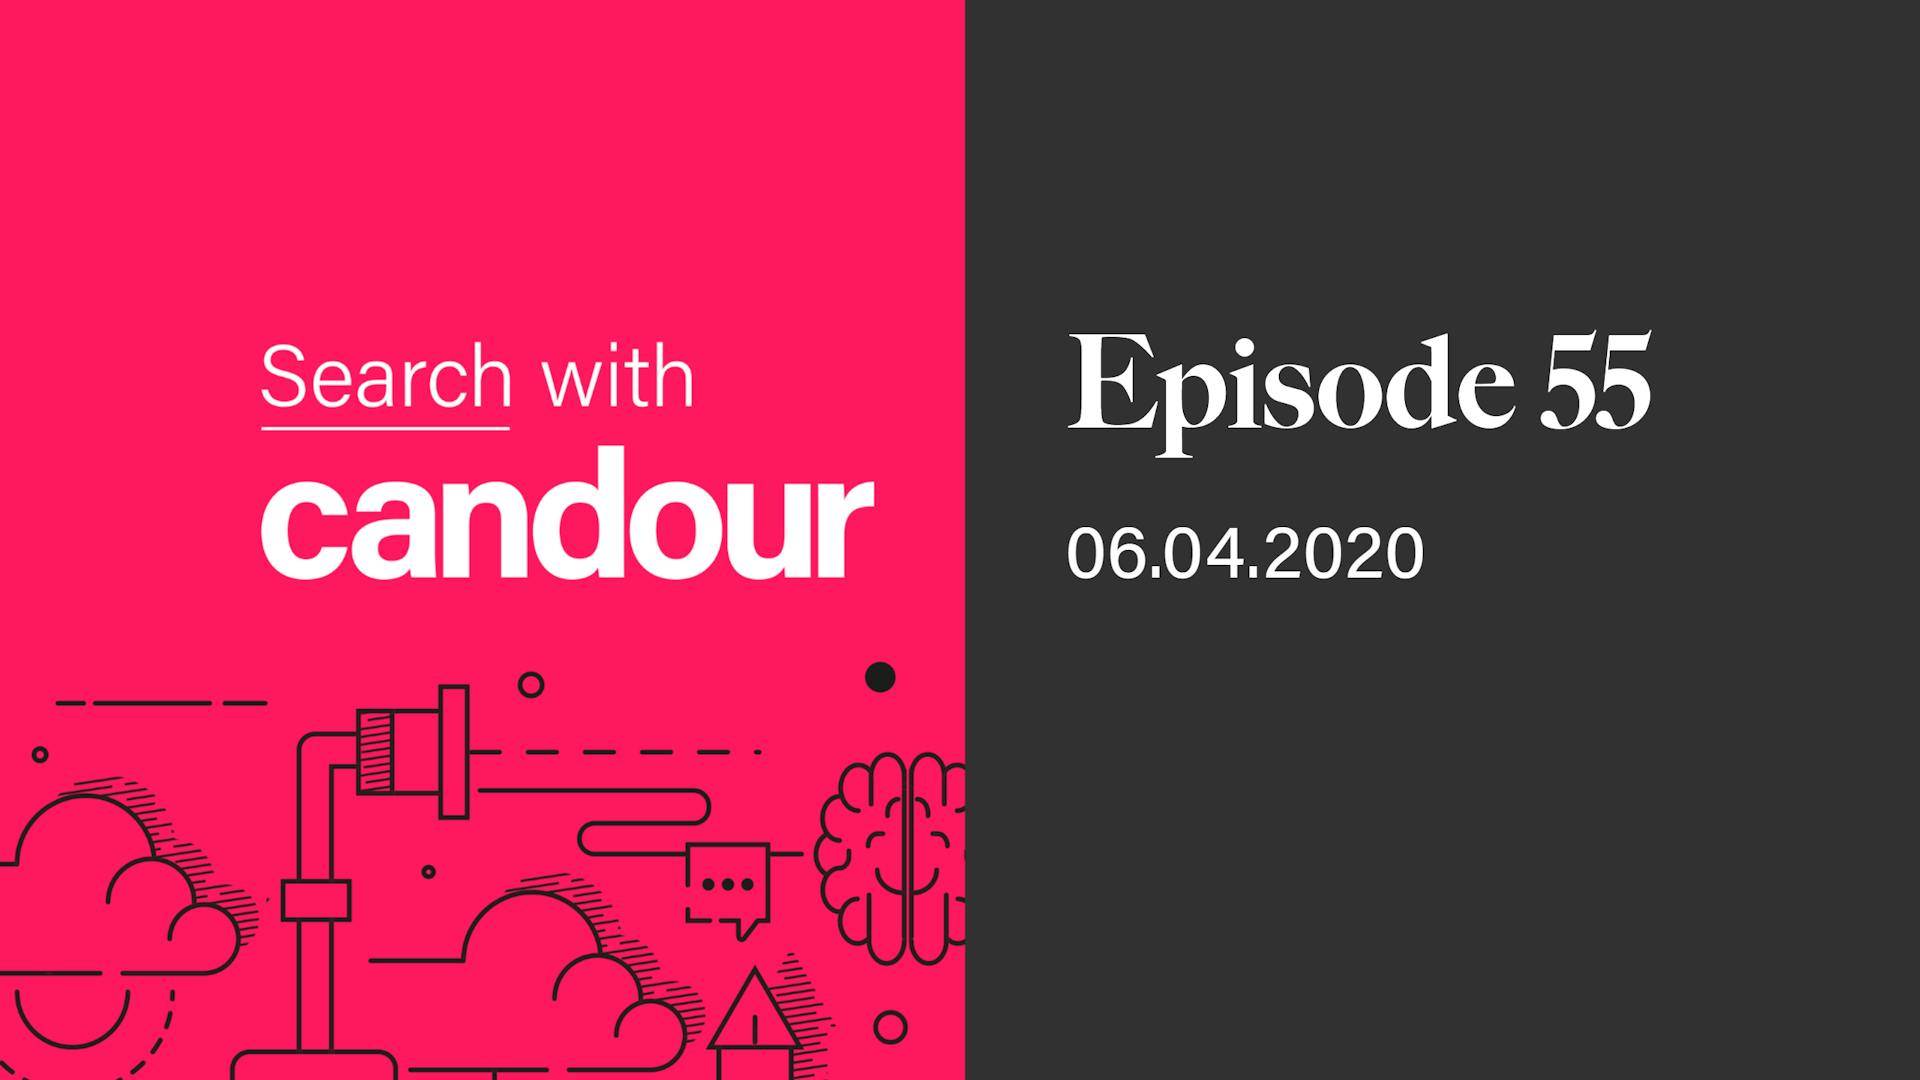 Episode 55 - Search with Candour